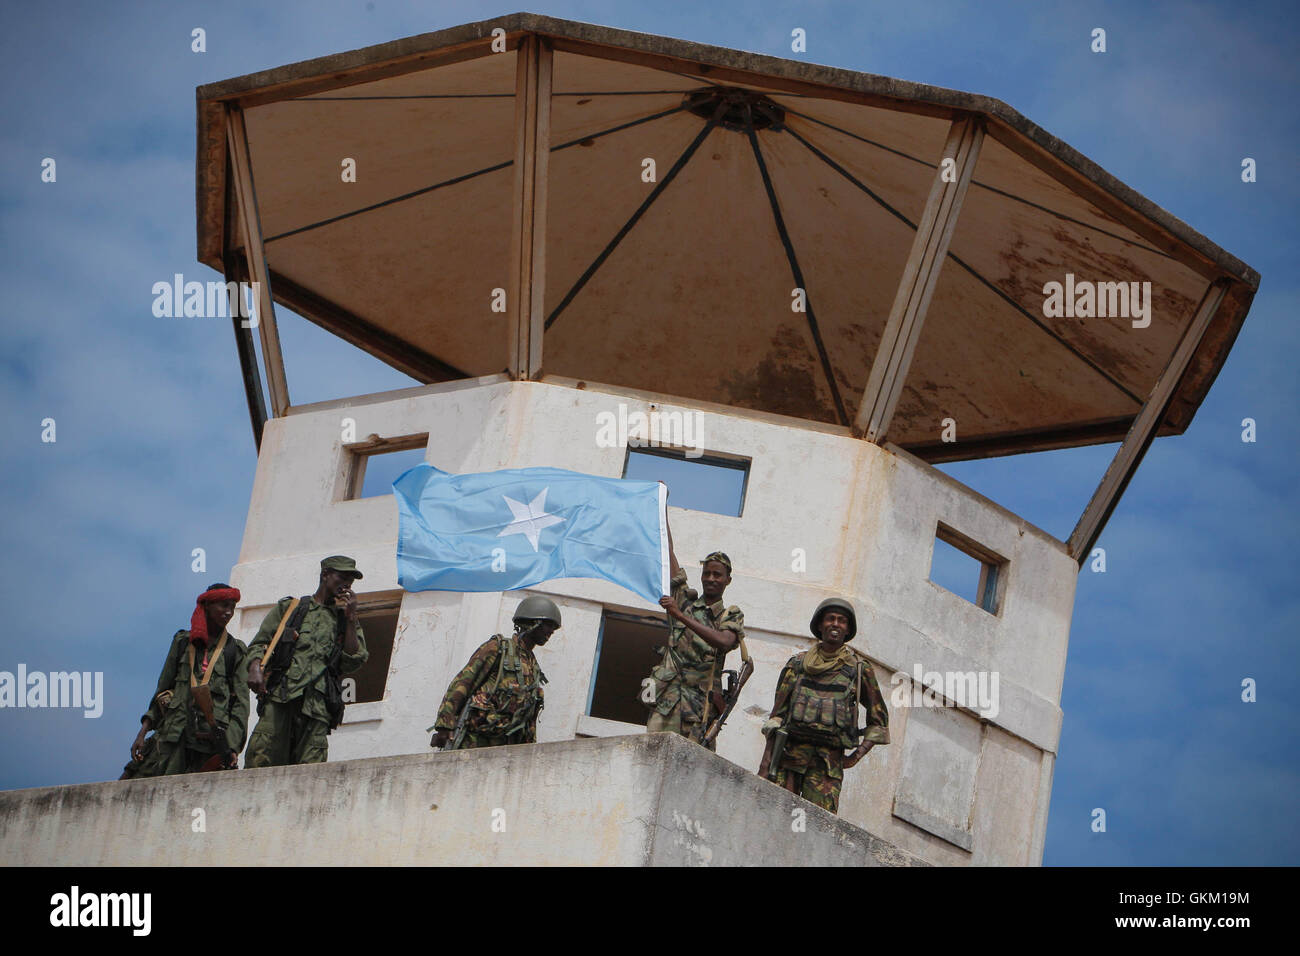 SOMALIA, Kismayo: In a handout photograph released by the African Union-United Nations Information Support Team 02 October, members of the Somali National Army and the government-allied Ras Kimboni militia display the Somali national flag from the former control tower of Kismayo Airport while they celebrate it's capture after Kenyan AMISOM troops moved into and through Kismayo, the hitherto last major urban stronghold of the Al-Qaeda-affiliated extremist group Al Shabaab, on their way to the airport without a shot being fired following a two-month operation to liberate towns and villages acros Stock Photo